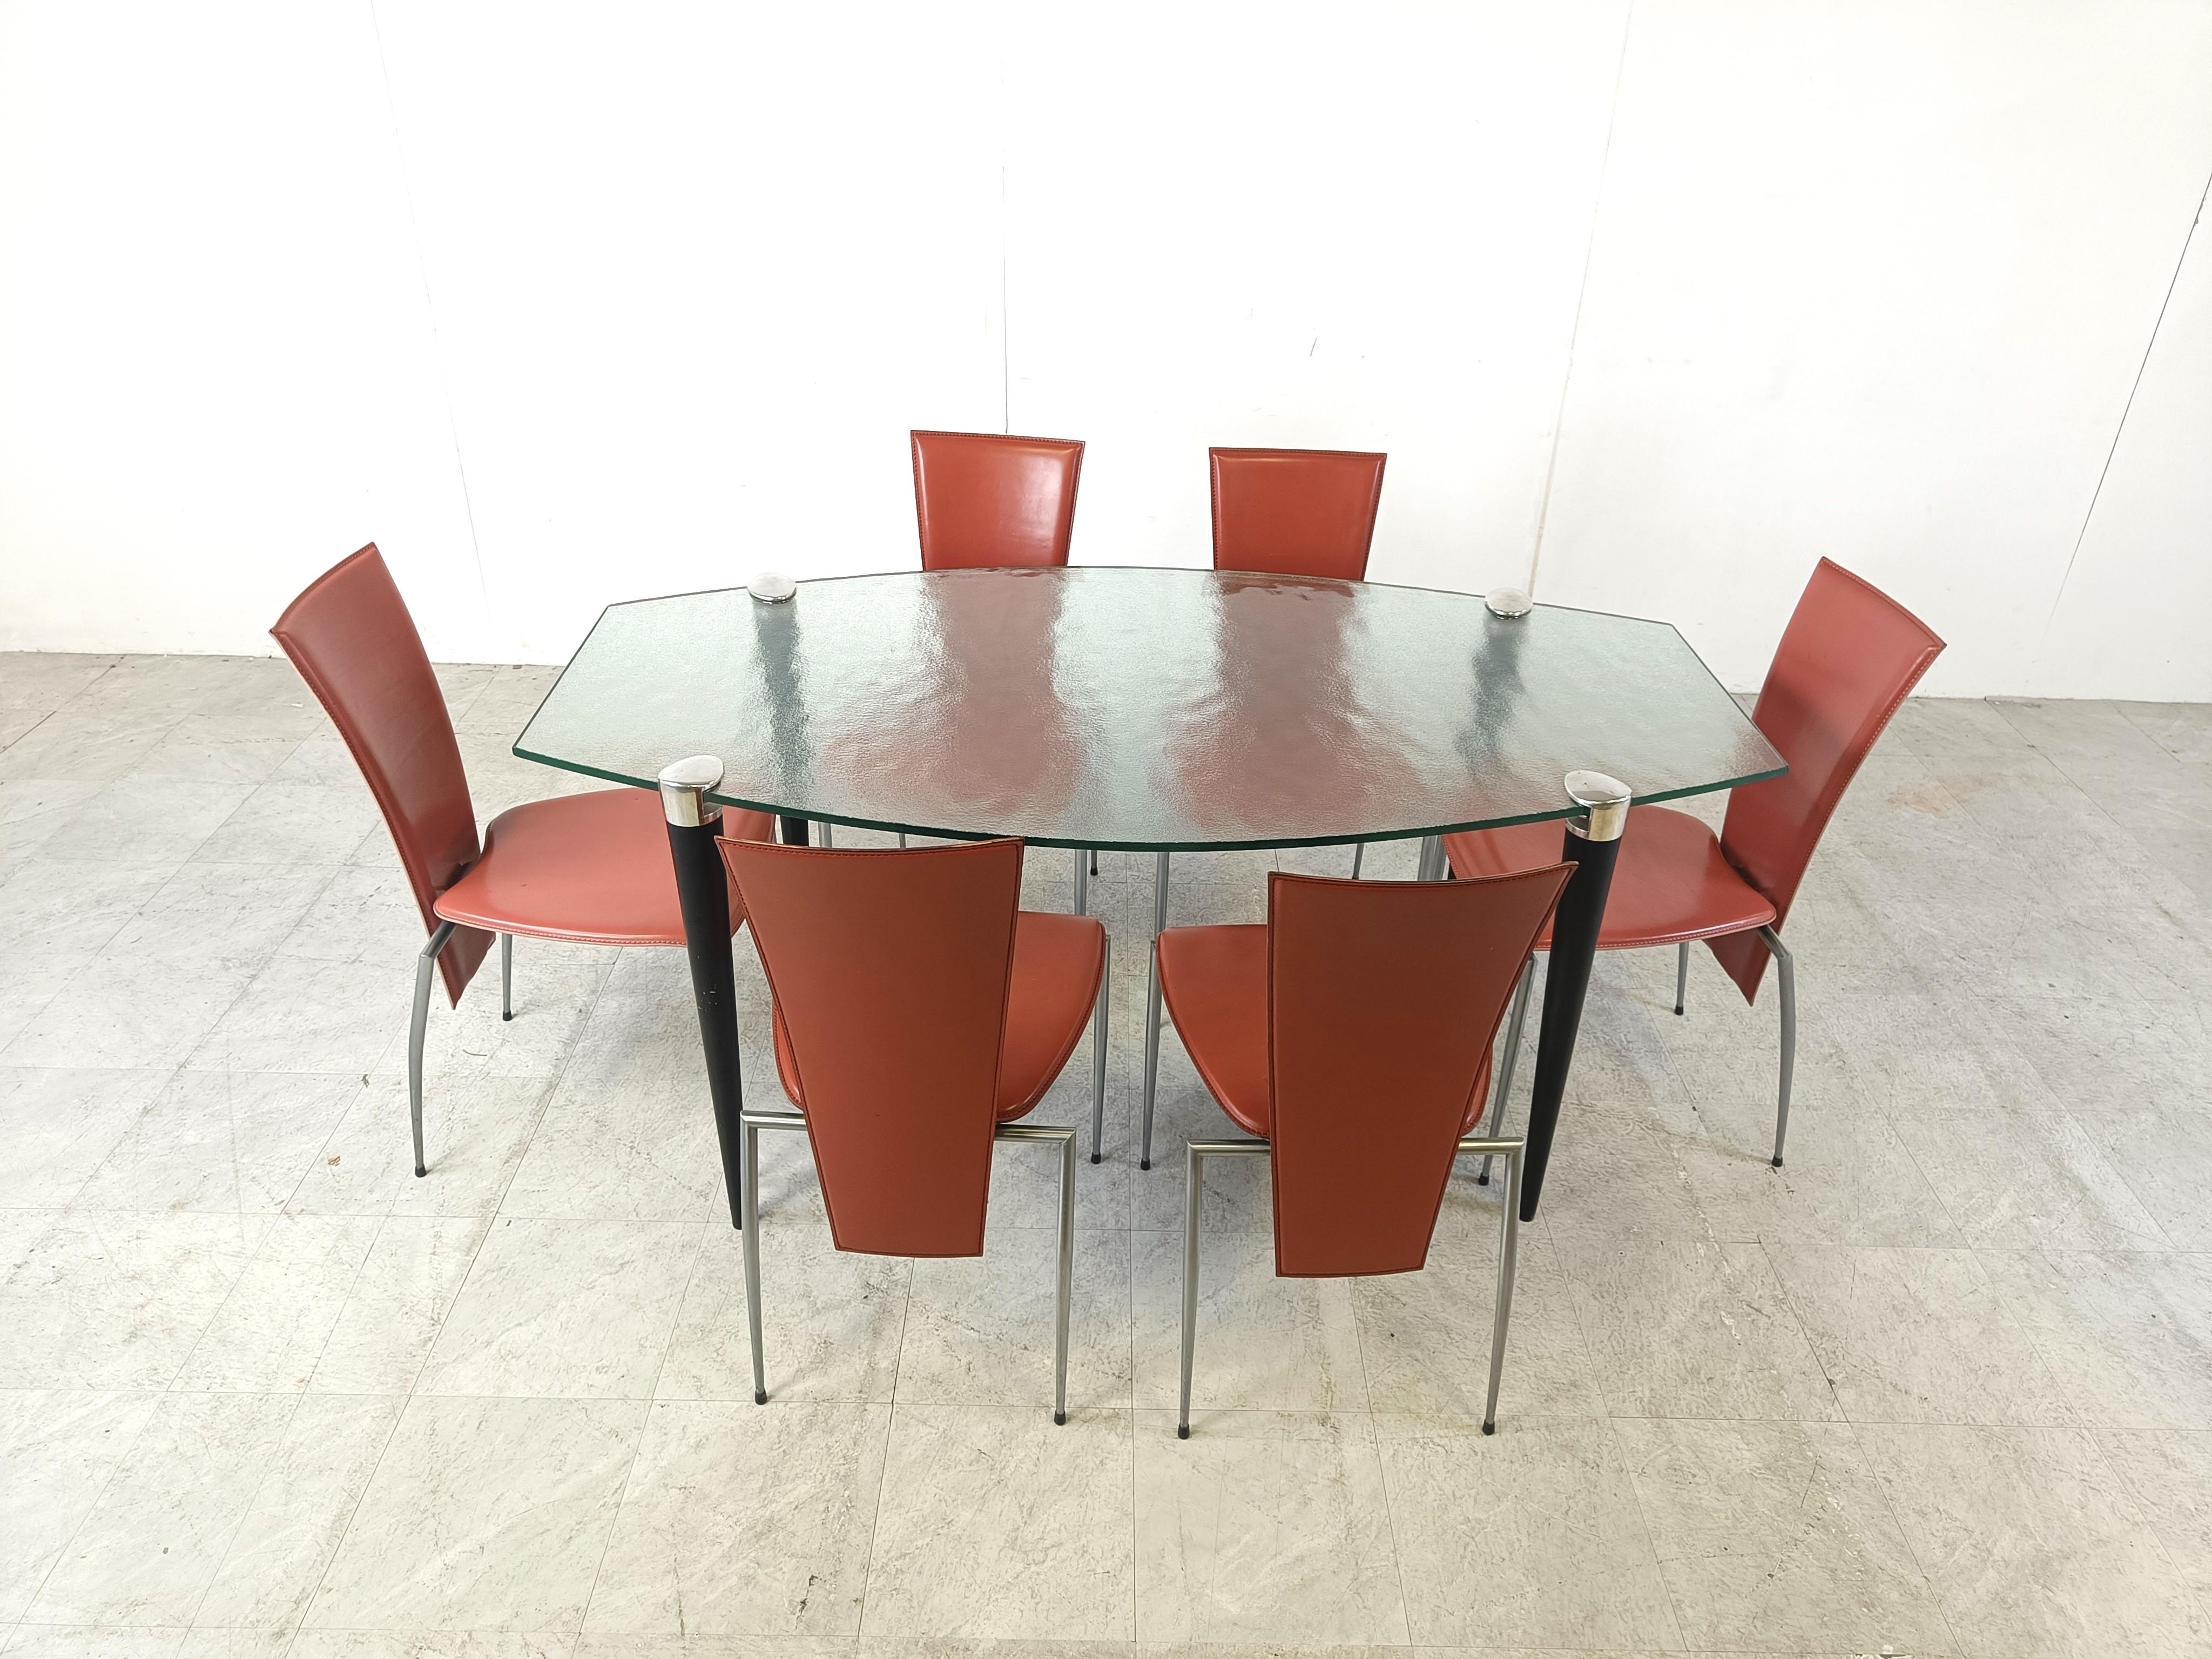 Set of 6 red leather dining chairs by Arrben Italy.

Beautiful curved backrests and seats with very elegant metal legs.

Very good condition

1980s - Italy

Dimensions
Height: 86cm/33.41